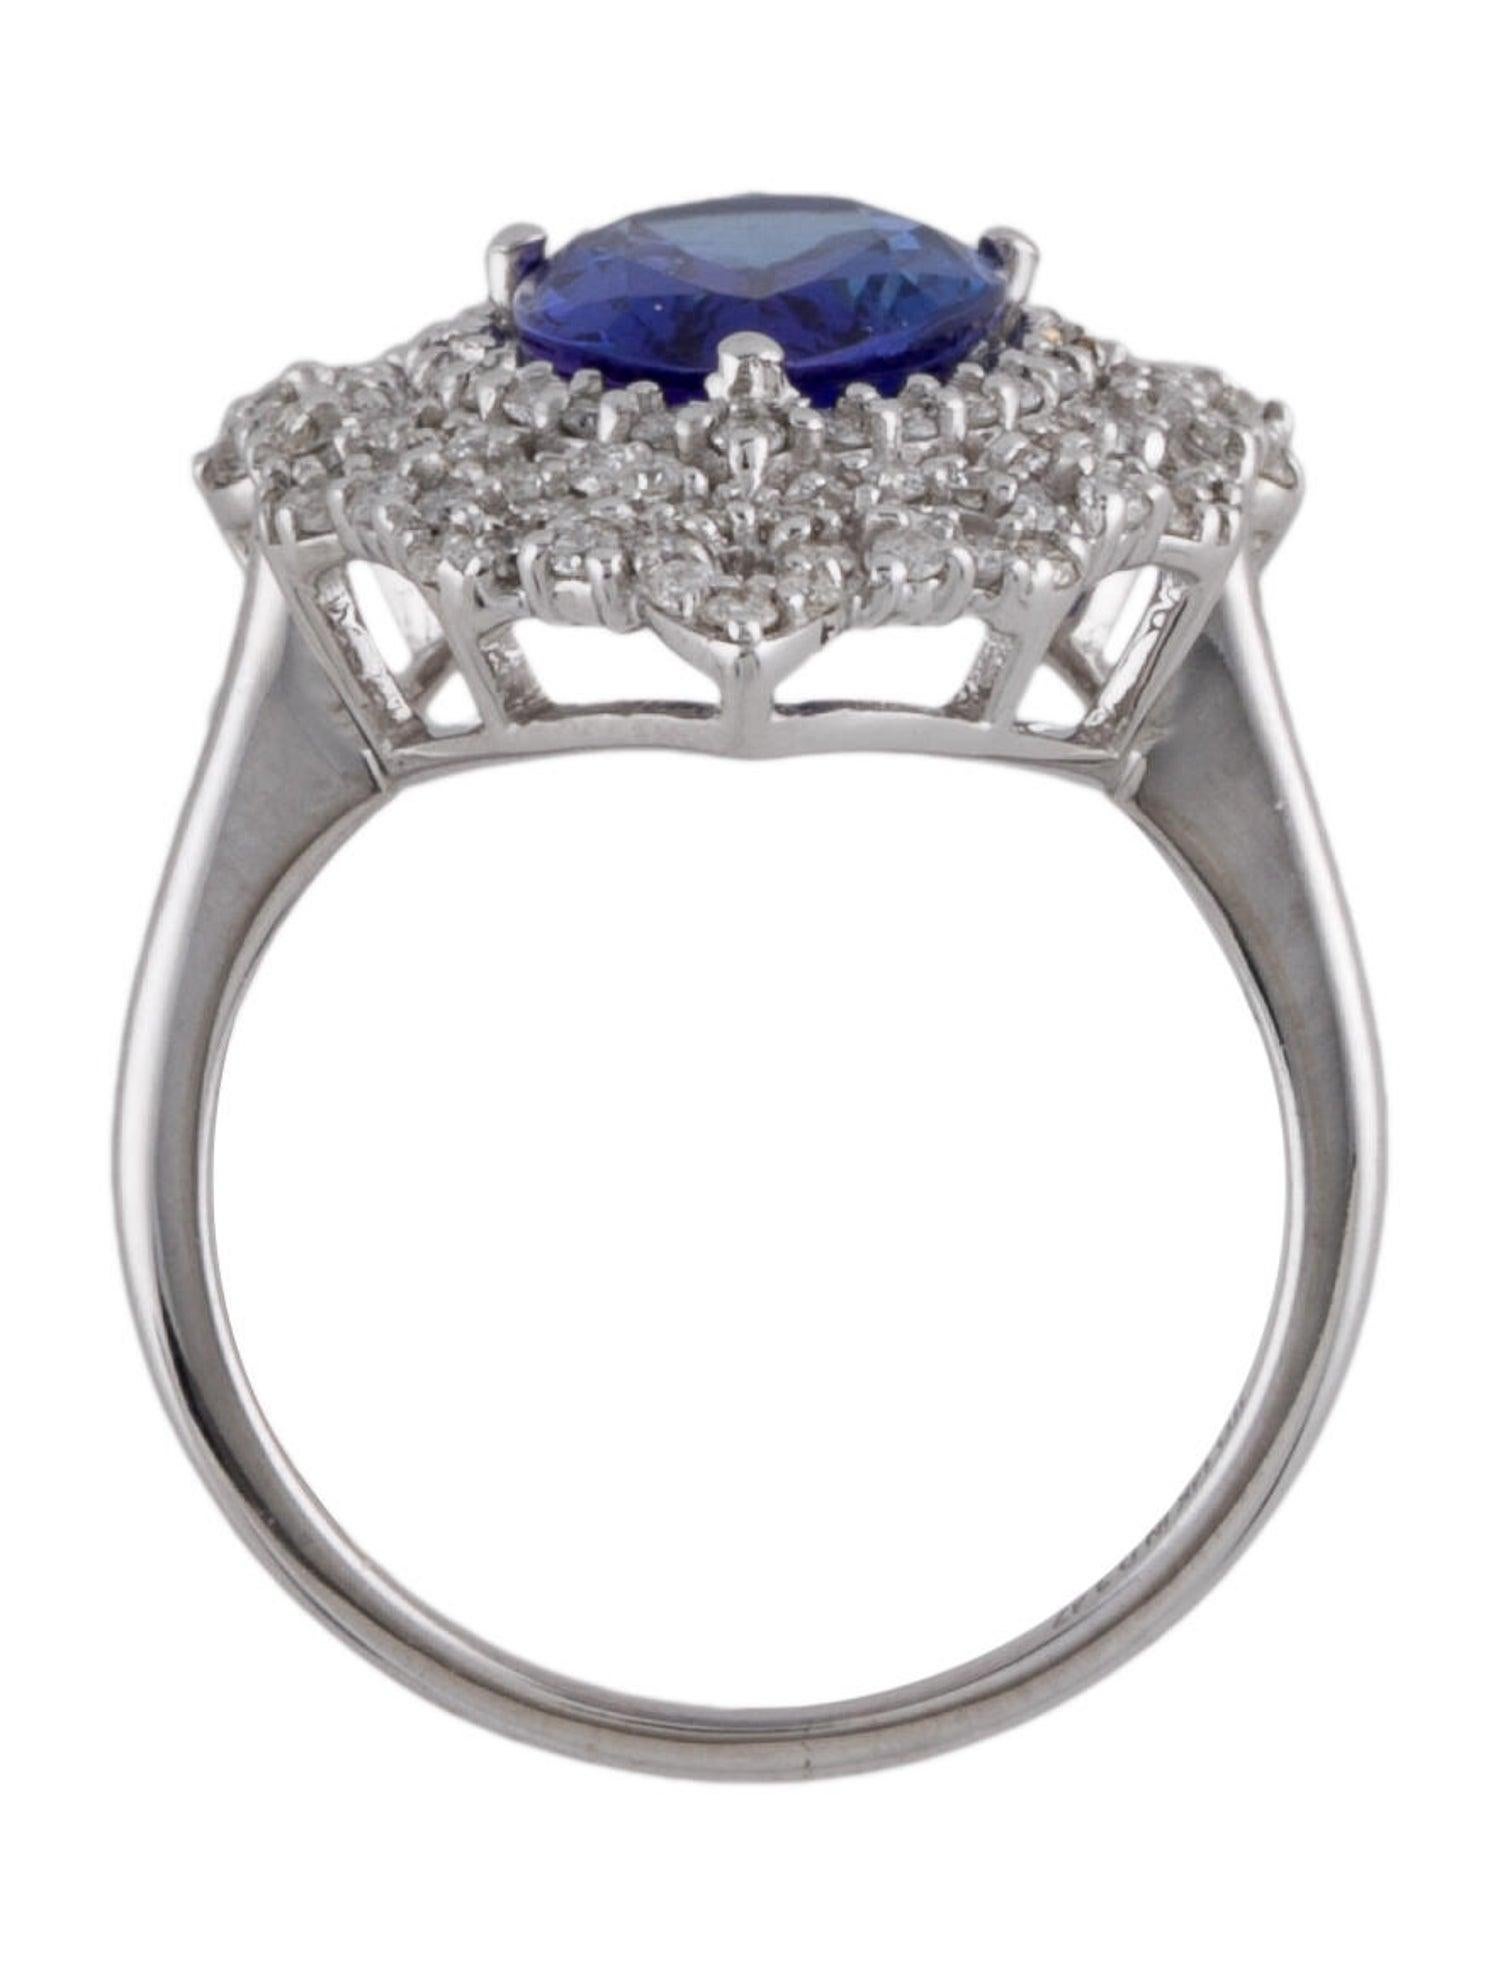 Women's 14K White Gold Pear Shaped Tanzanite & Diamond Cocktail Ring, 2.48ct For Sale